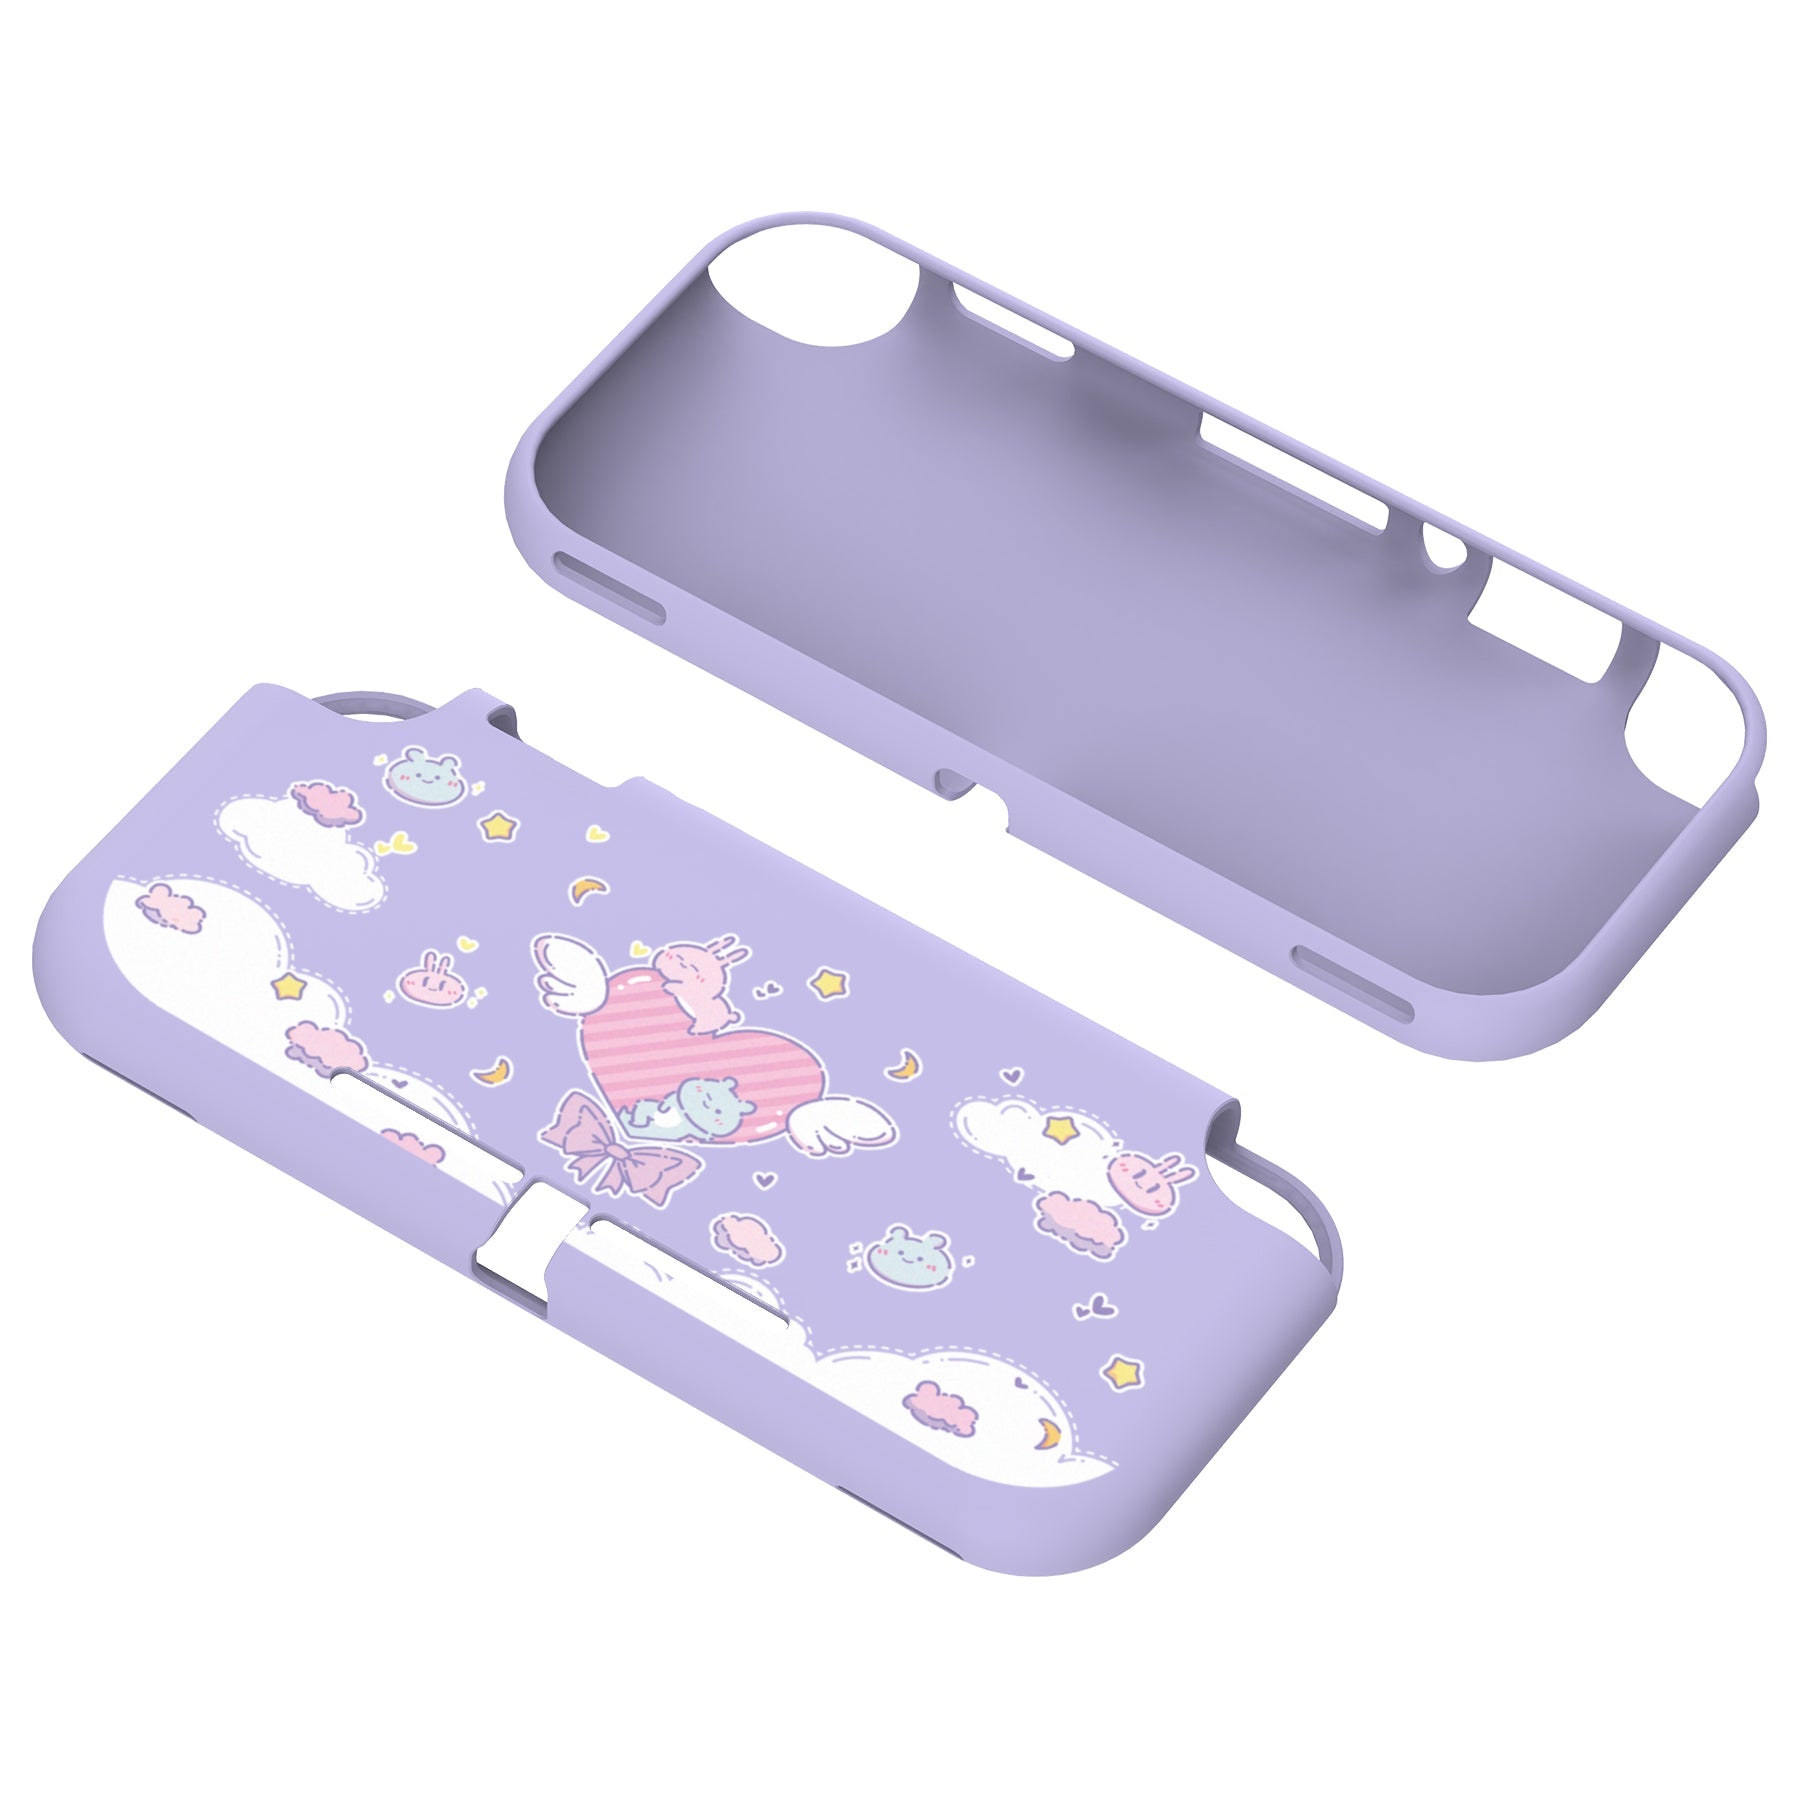 Are You Am I - Custom lighter case 🦋 now with butterflies